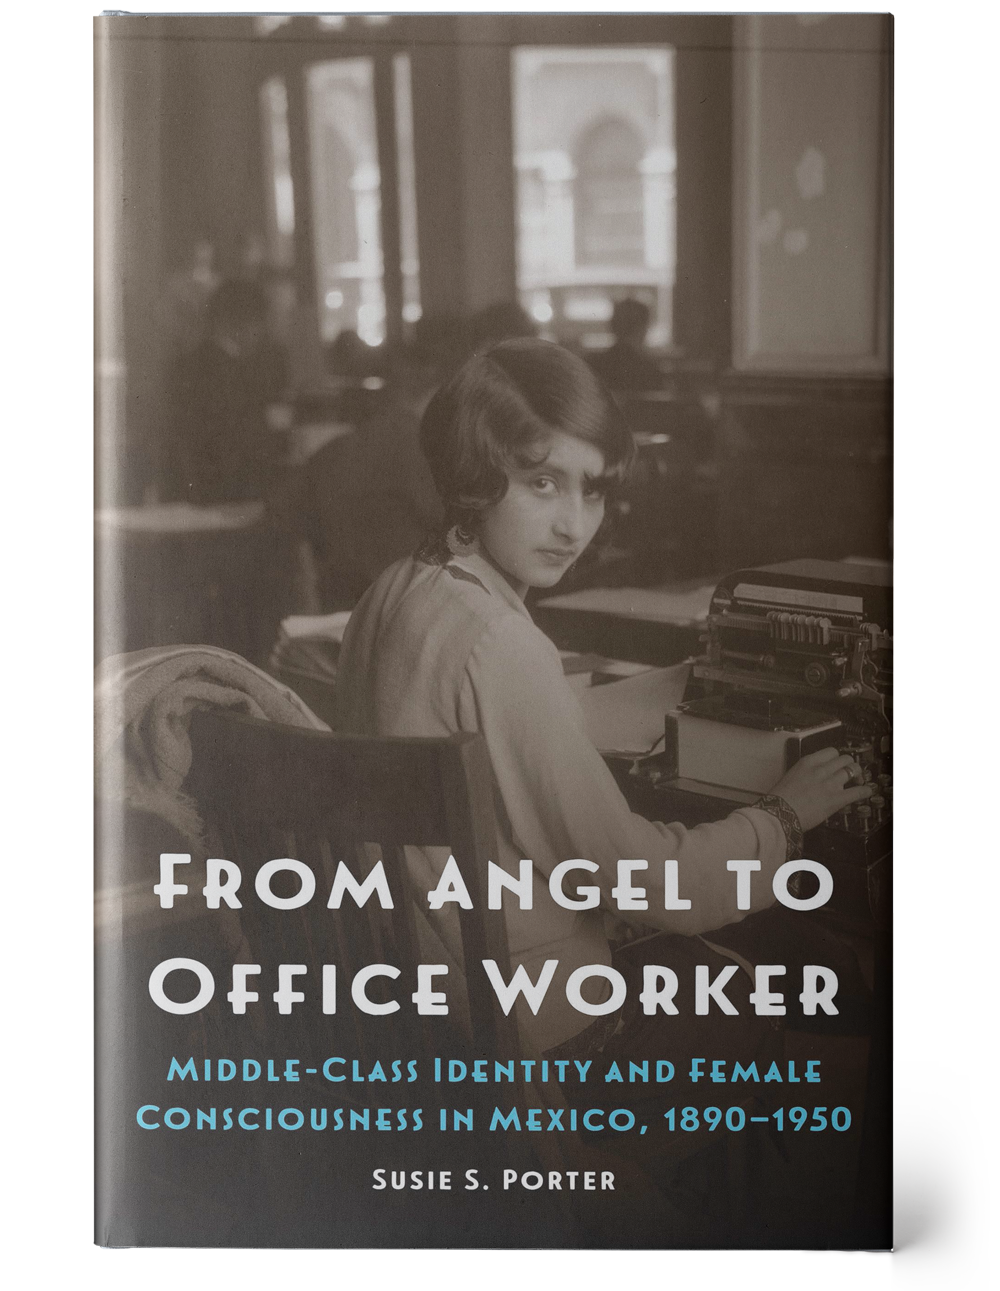 a book cover with a vintage, sepia-colored photograph of a female secretary at her desk. The bottom half of the cover displays the title, 'From Angel to Office Worker', in white followed by a blue subtitle, 'Middle-Class Identity and Female Consciousness in Mexico, 1890-1950', and the author's name, 'Susie S. Porter', in white.